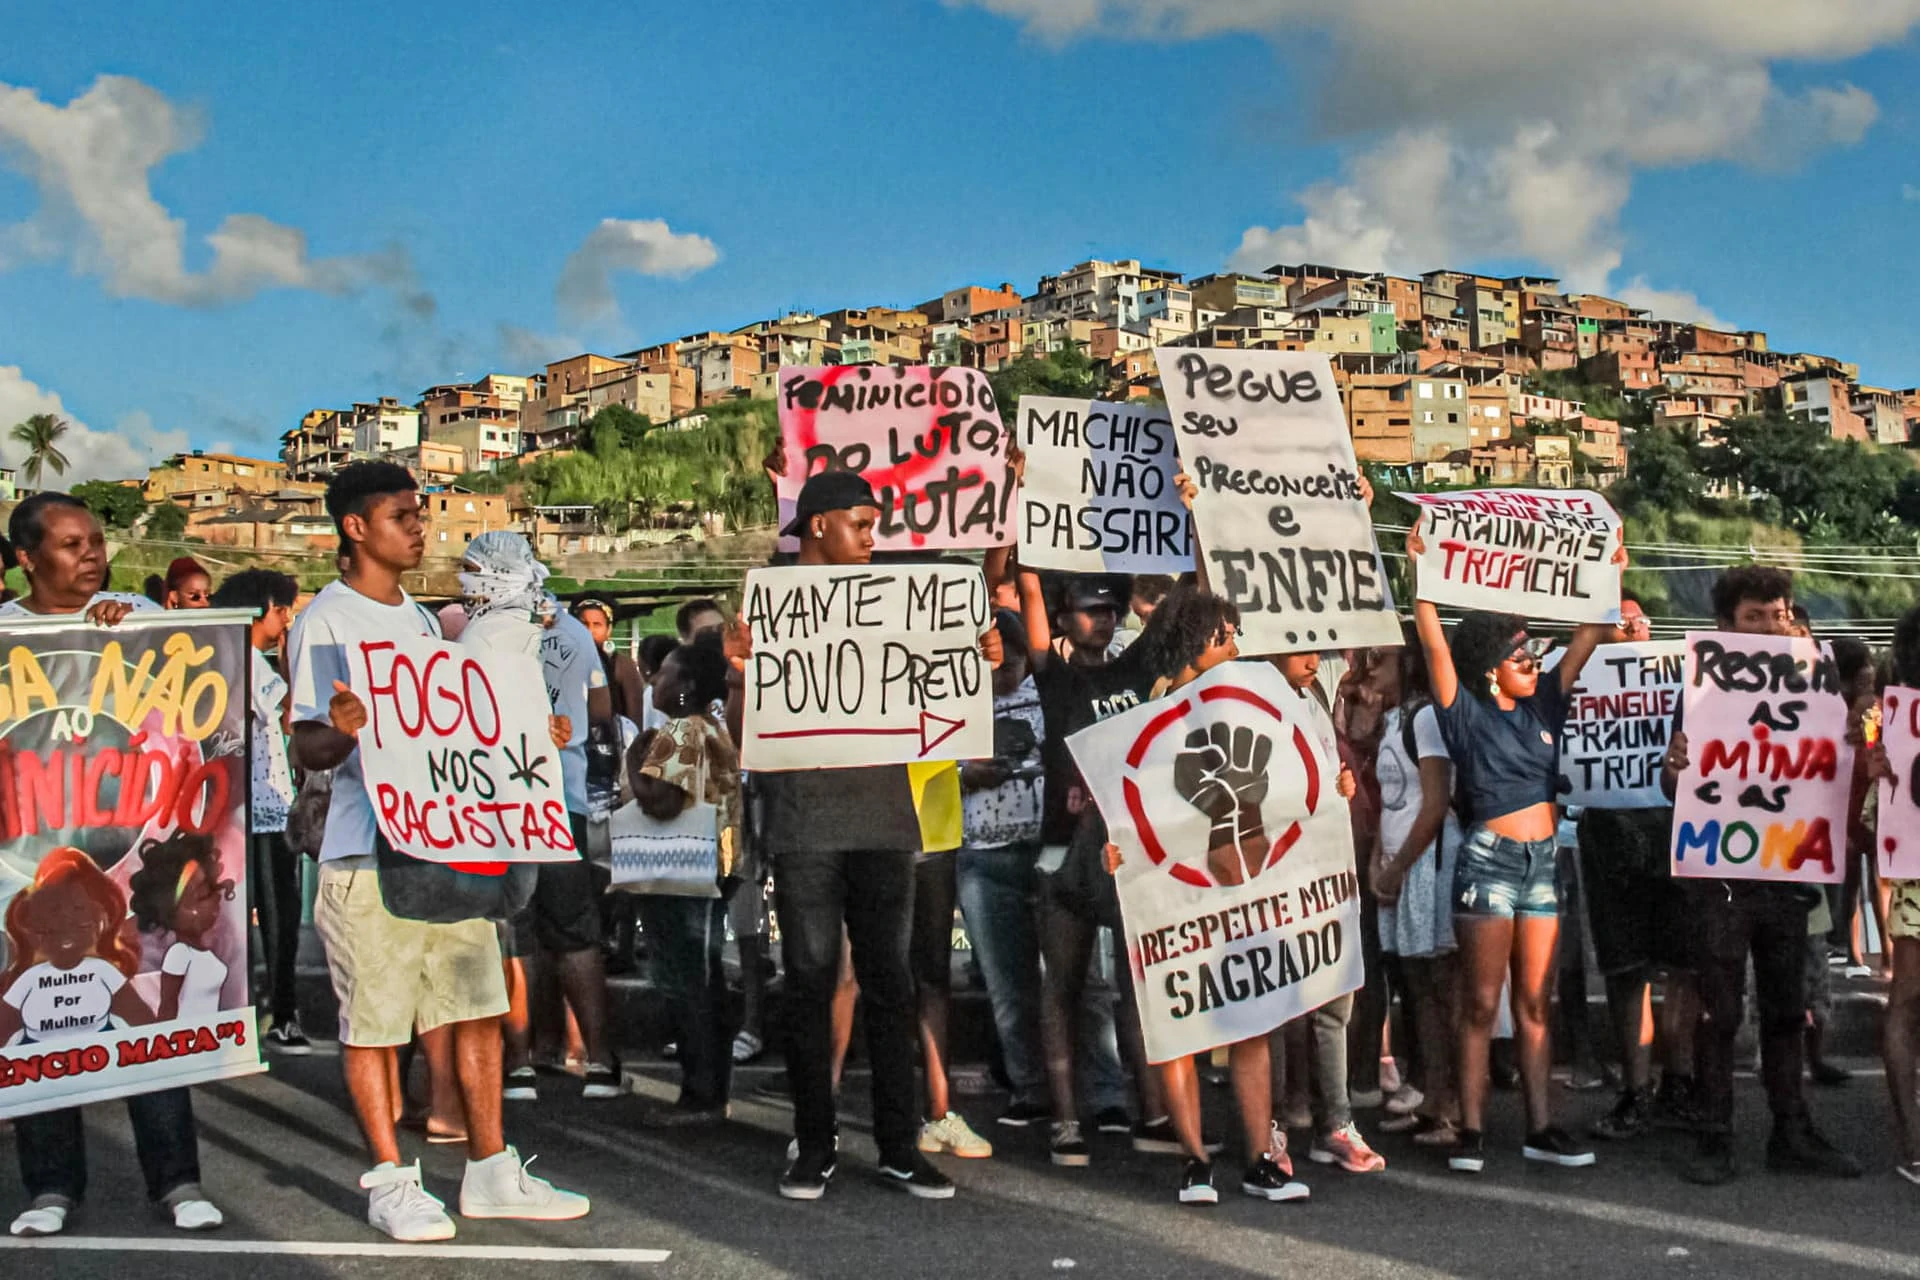 Young people holding up anti-gun shields, Portuguese slogans